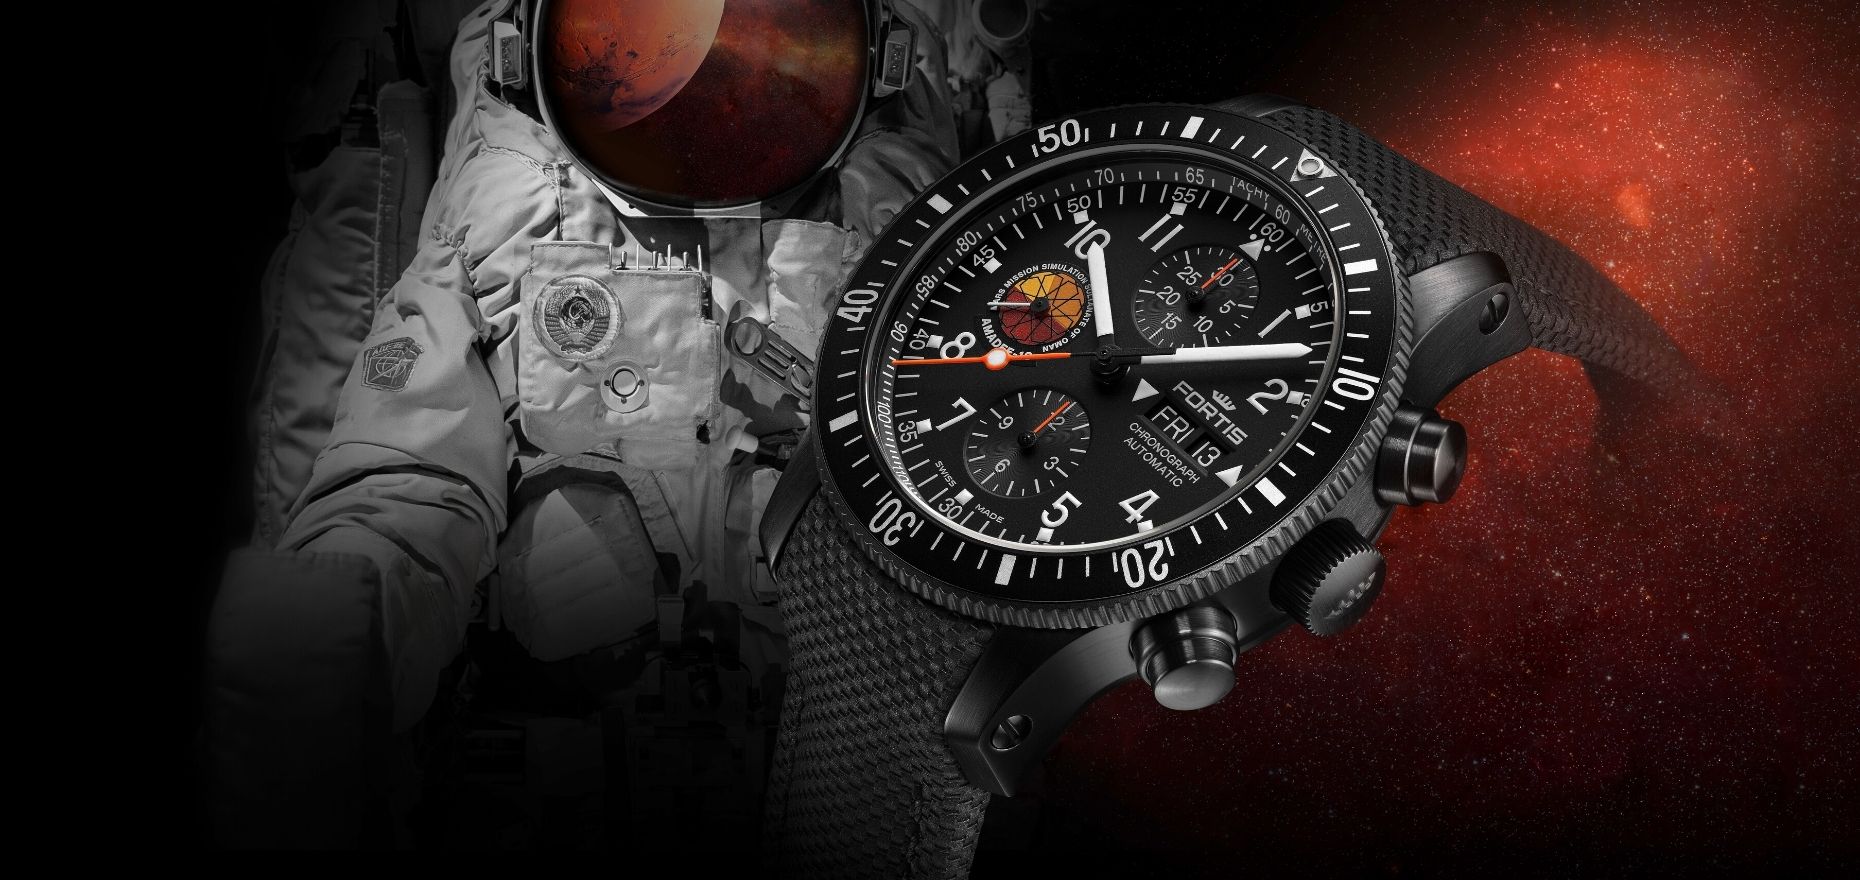 Fortis Official Cosmonauts Amadee-18 Chronograph: Astronaut gear for future Mars travellers